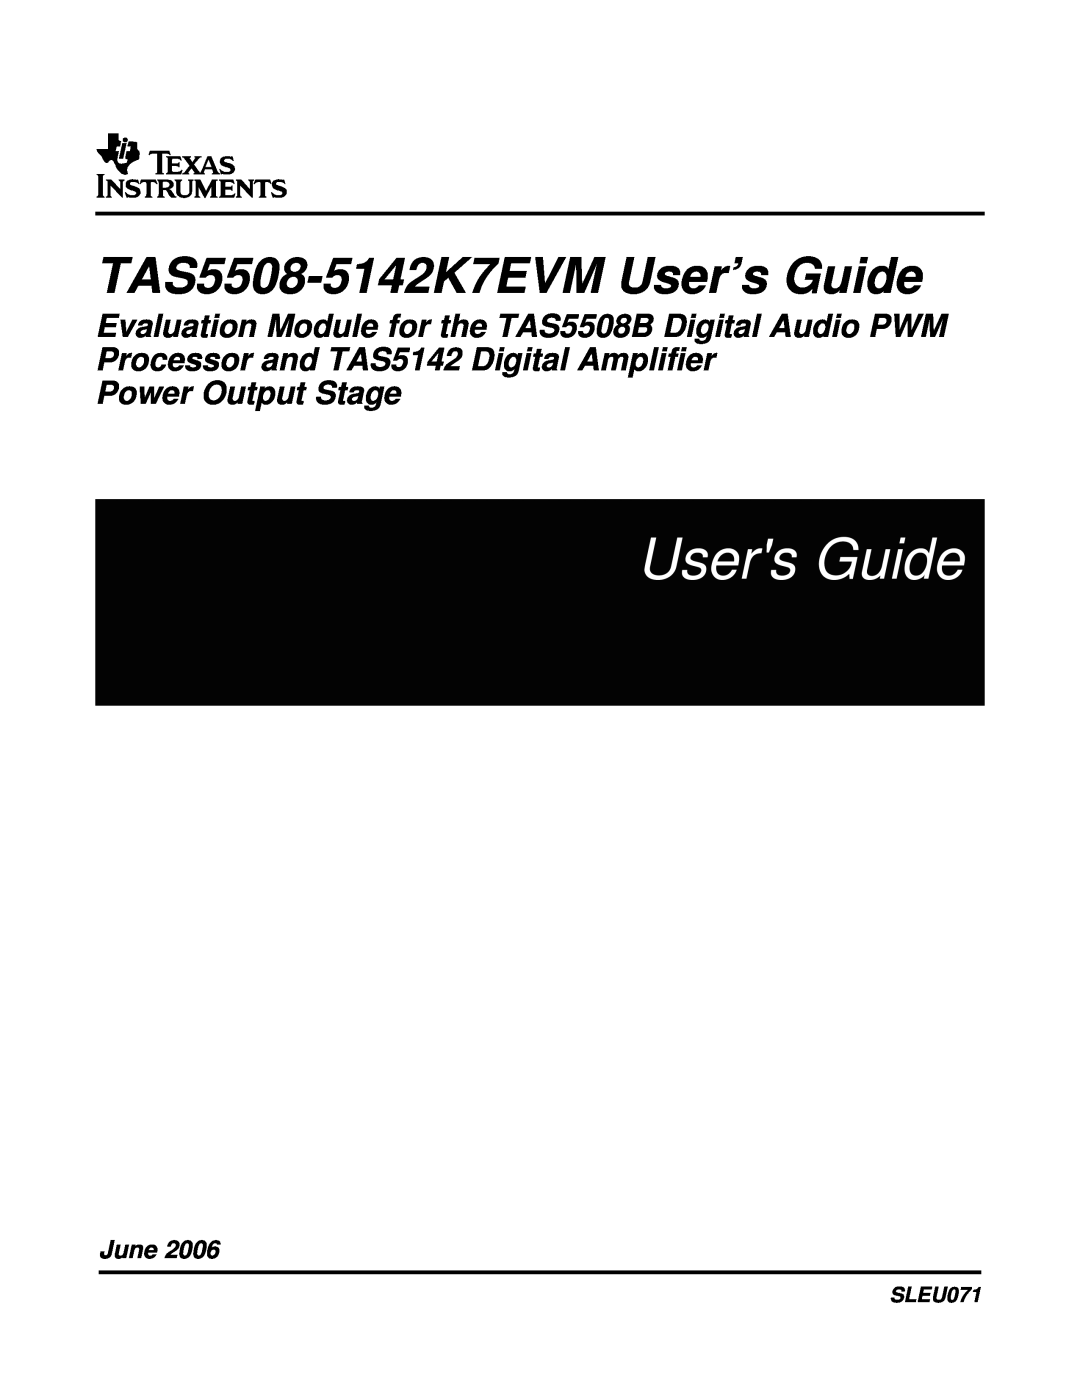 Texas Instruments manual Power Output Stage, Users Guide, TAS5508-5142K7EVMUser’s Guide, June, SLEU071 